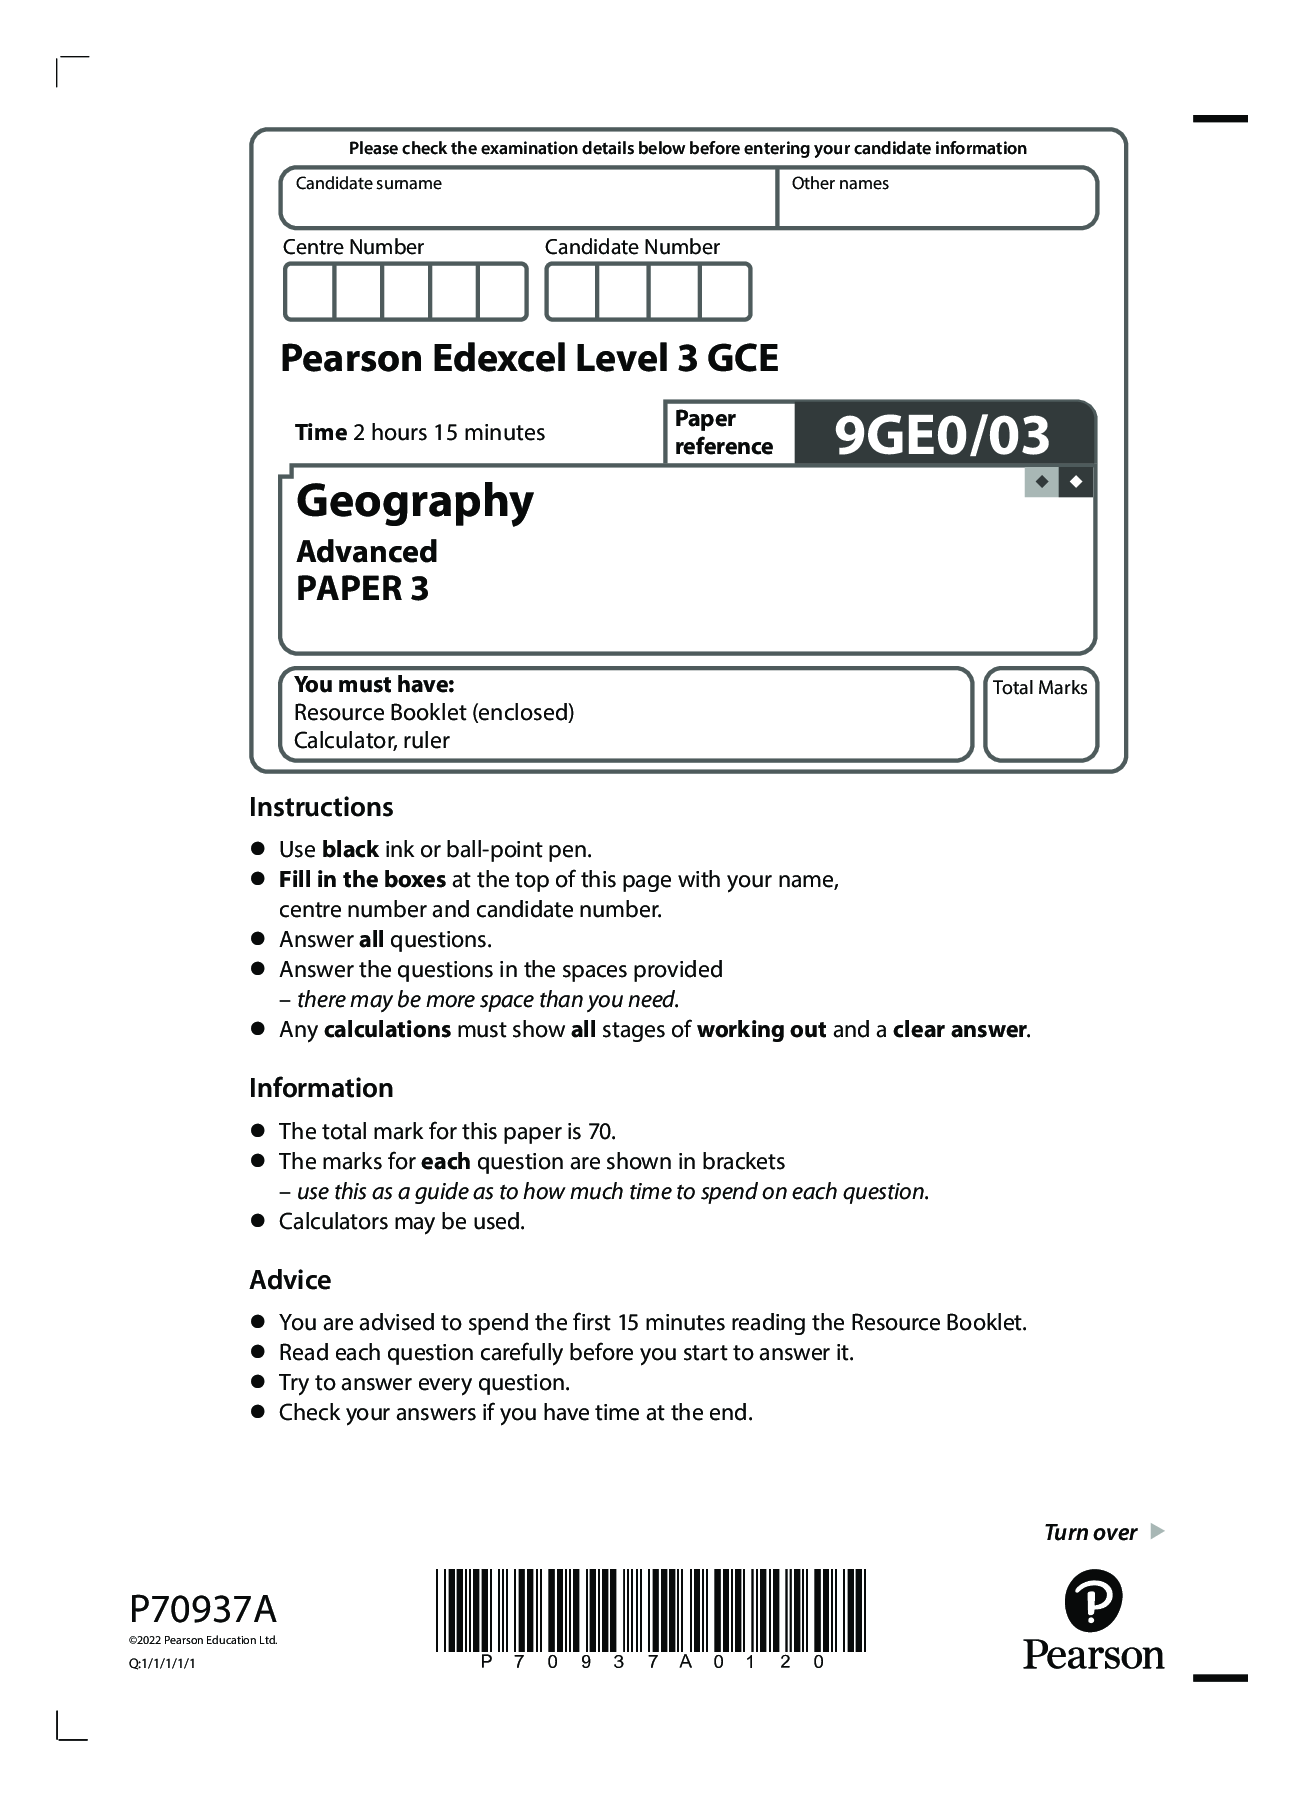 Pearson Edexcel Level 3 GCE 9GE0/03 2022 Geography Advanced PAPER 3 ...